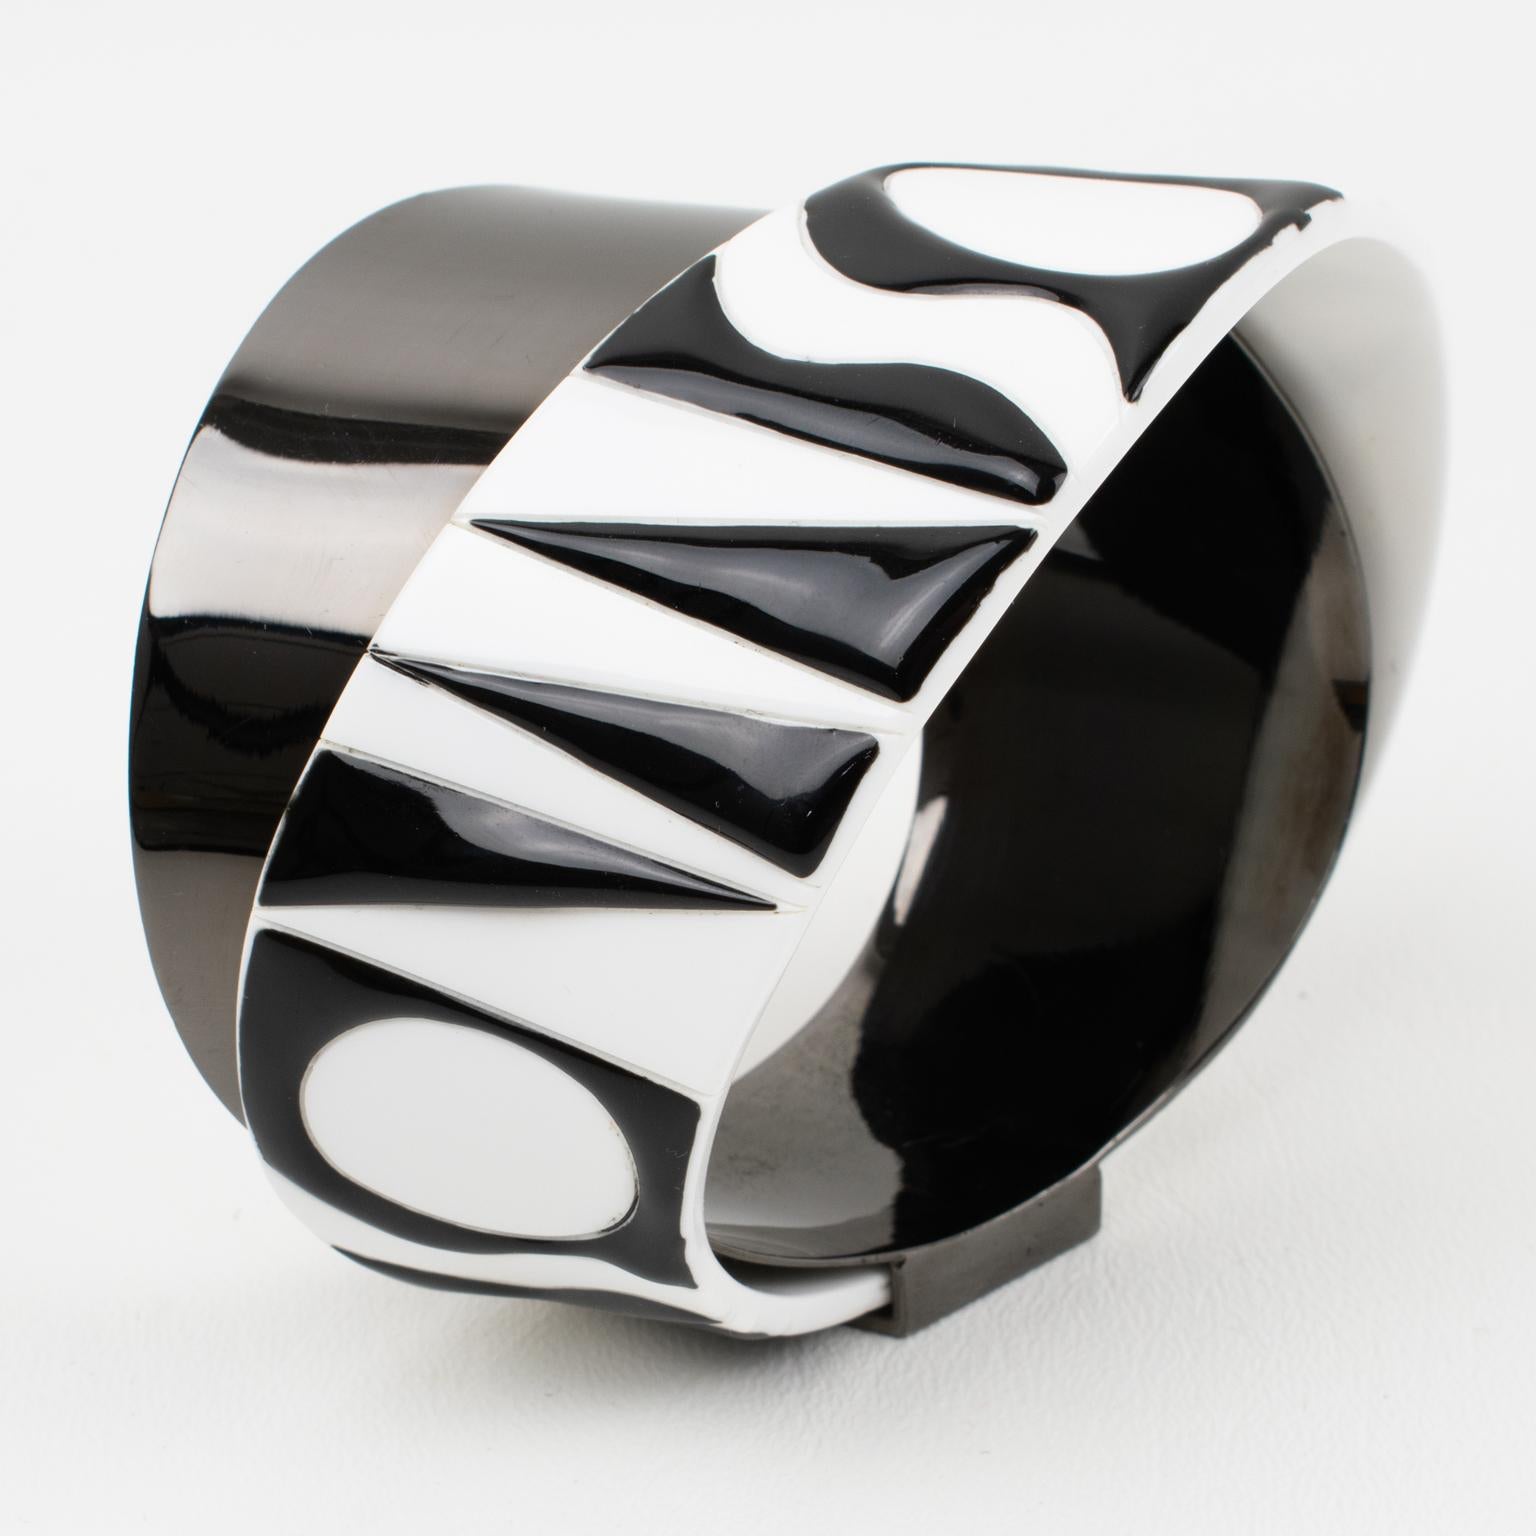 Missoni Black and White Lucite and Metal Bracelet Bangle, Runway Spring 2014 For Sale 2